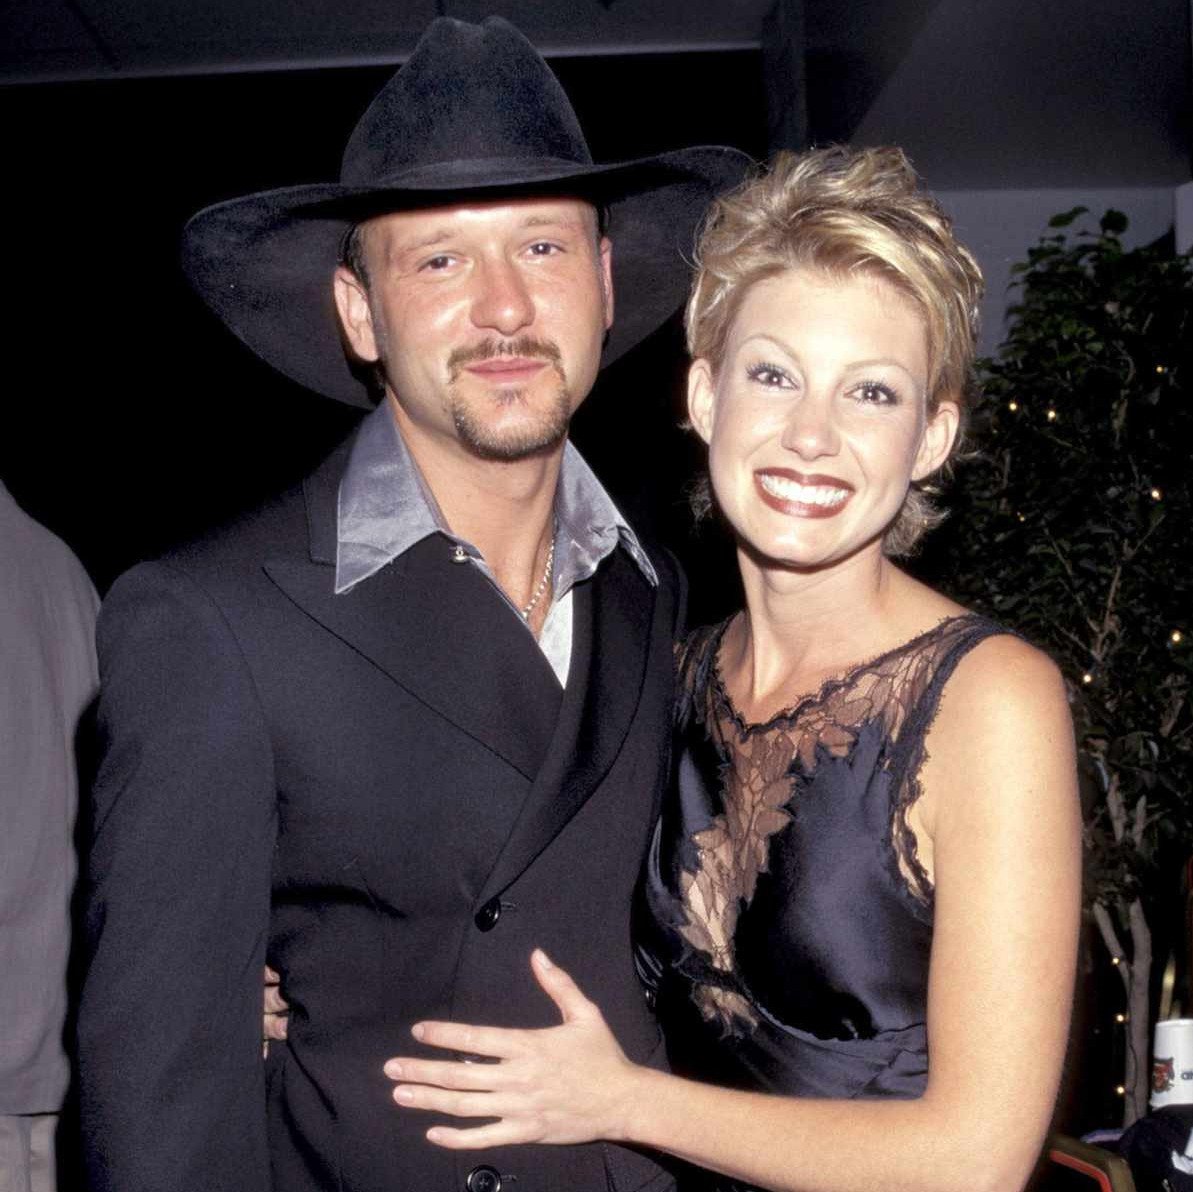 Tim Mcgraw And Faith Hill Then And Now, Hat, Facial expression, Smile, Sun hat, Flash photography